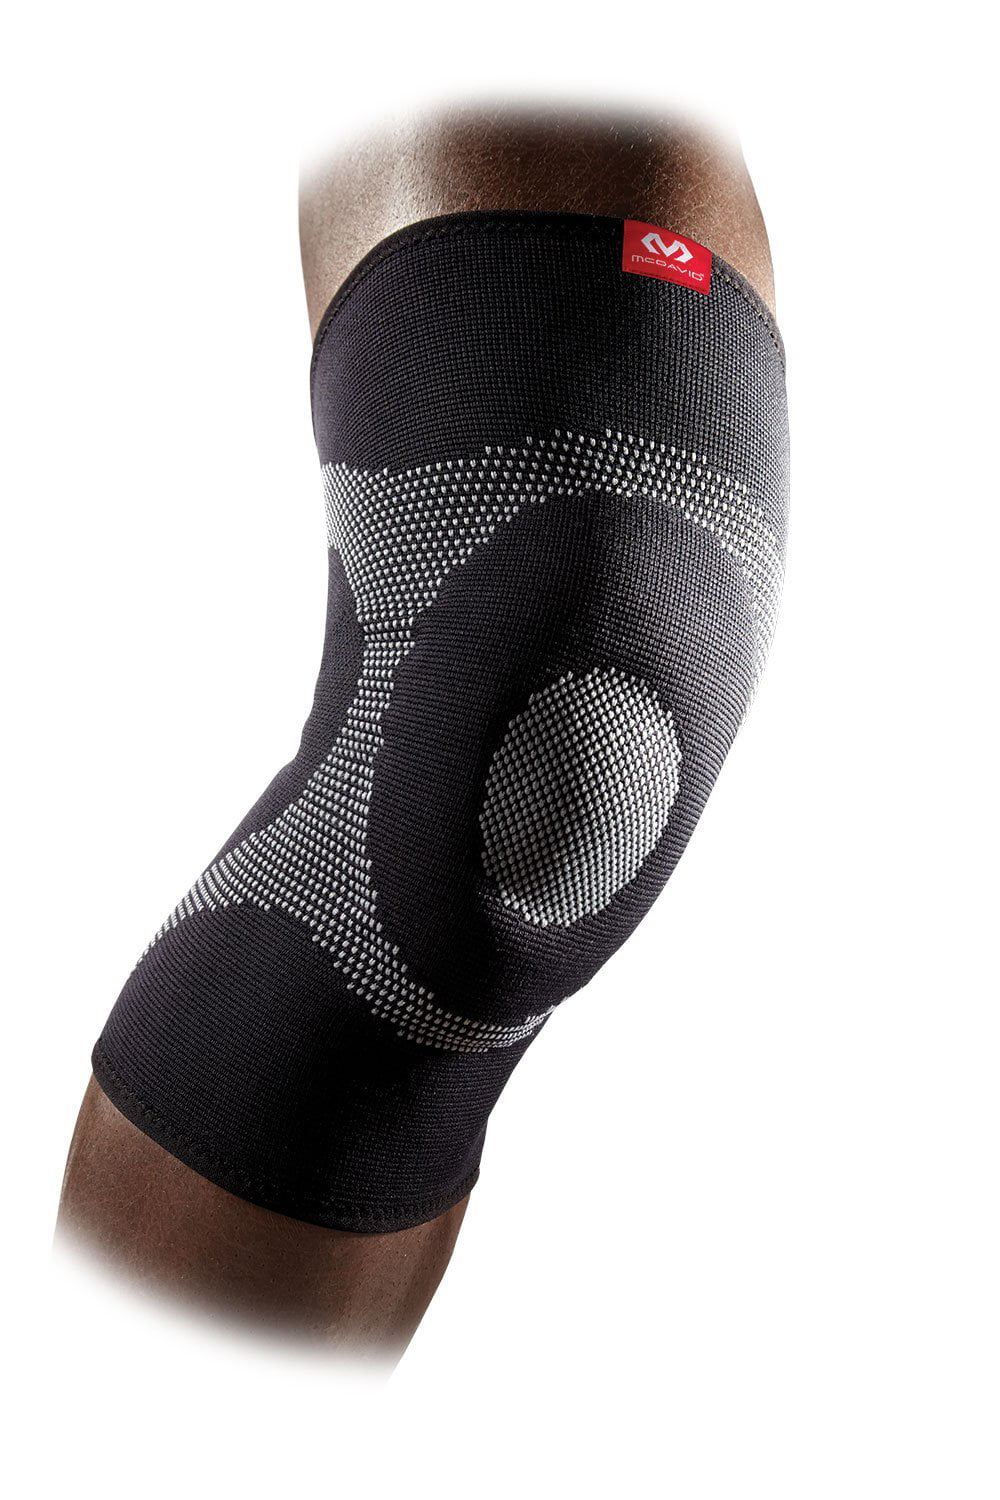 UsHigh Knee Brace Support Compression Sleeve with Side Stabilizers High Elastic Fabric for Men Women Arthritis Running Meniscus Tear Cross-Fit Joint Pain Relief Injury Recovery